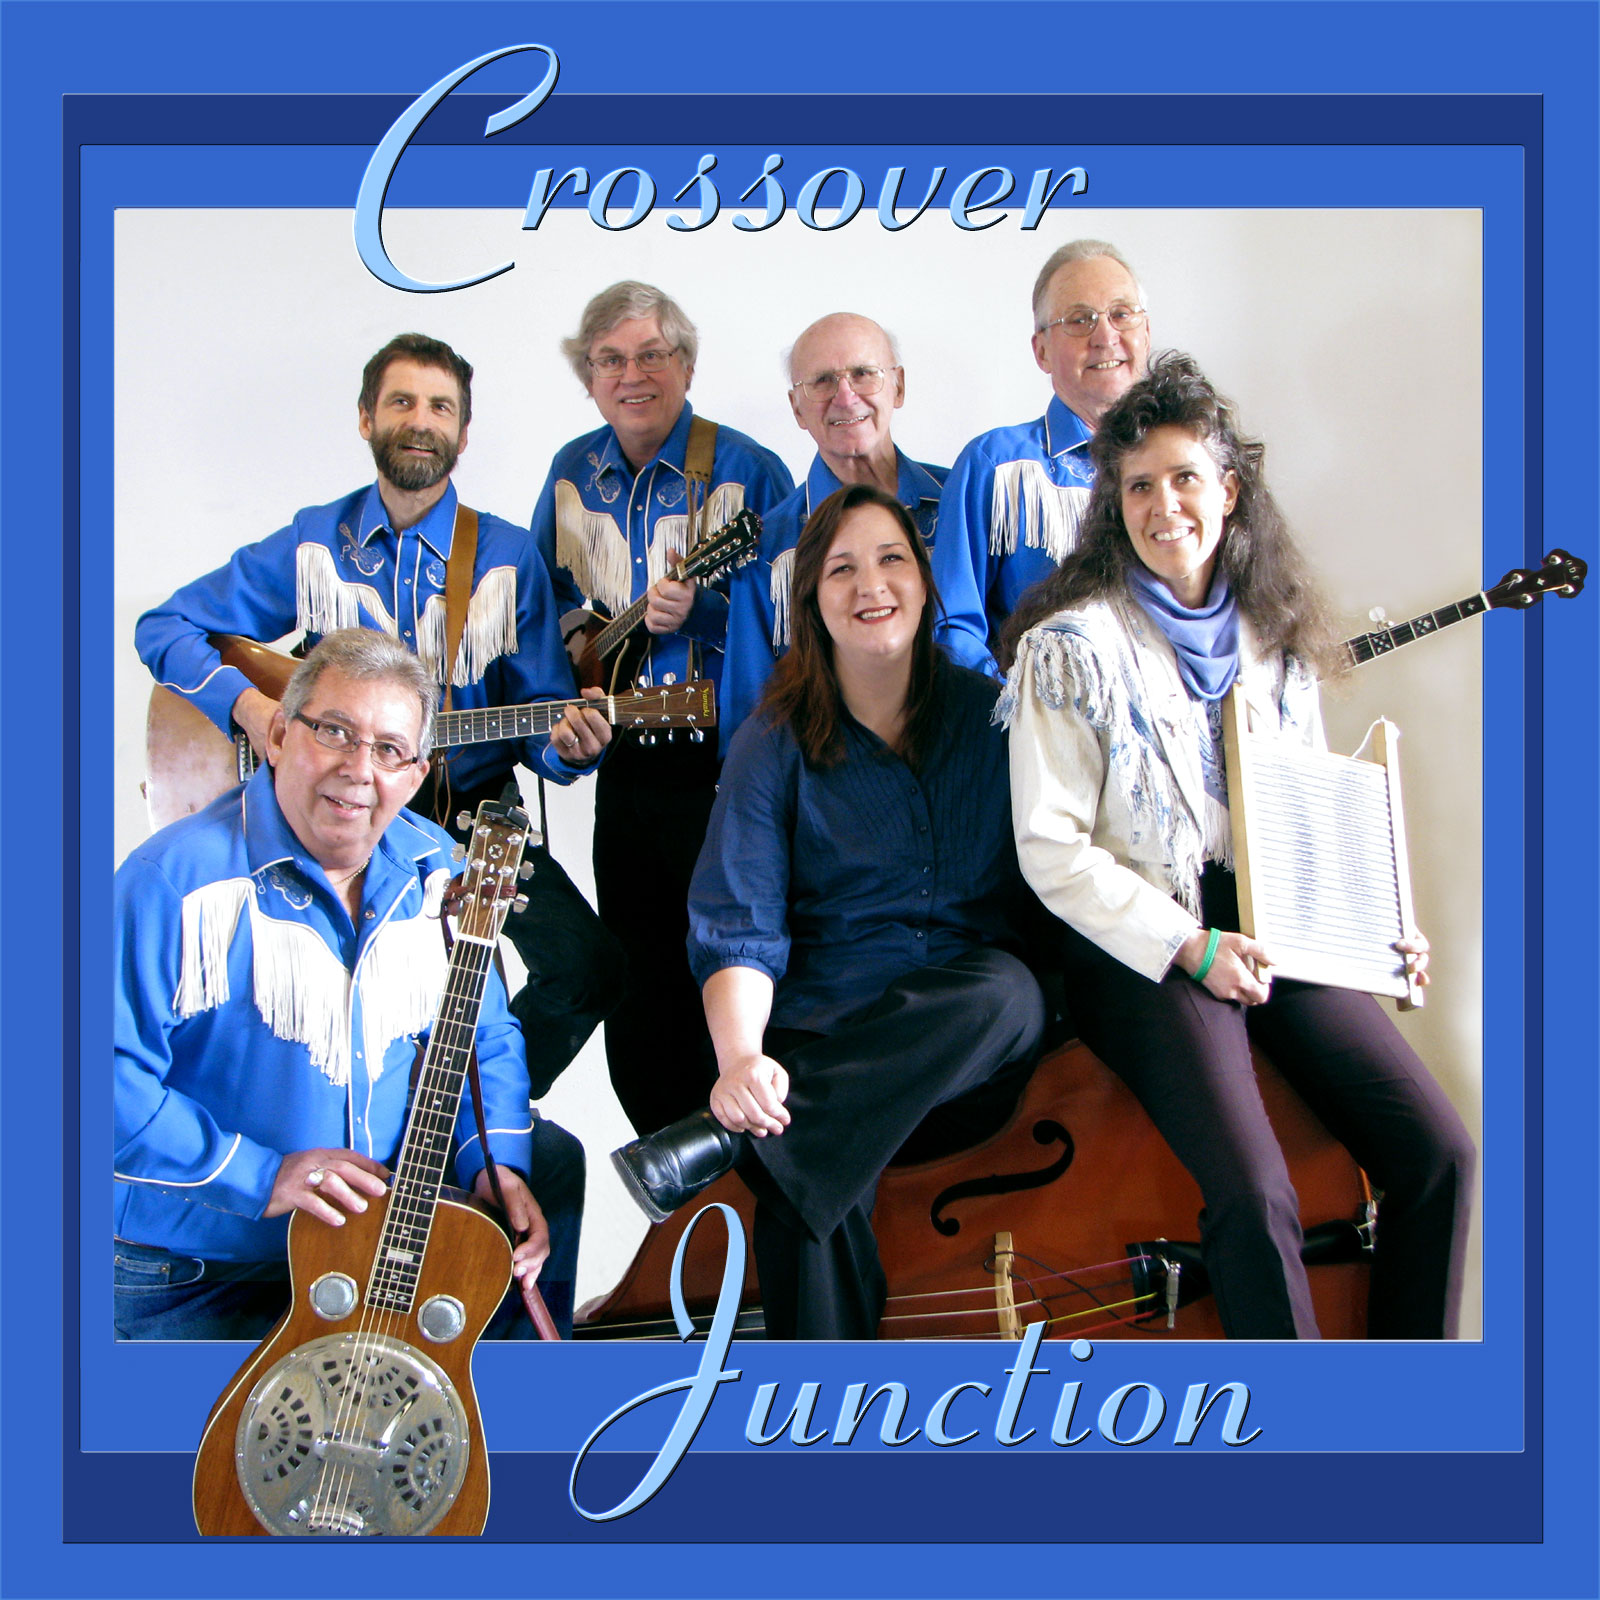 This is graphically bordered photograph of the band simply titled CROSSOVER JUNCTION